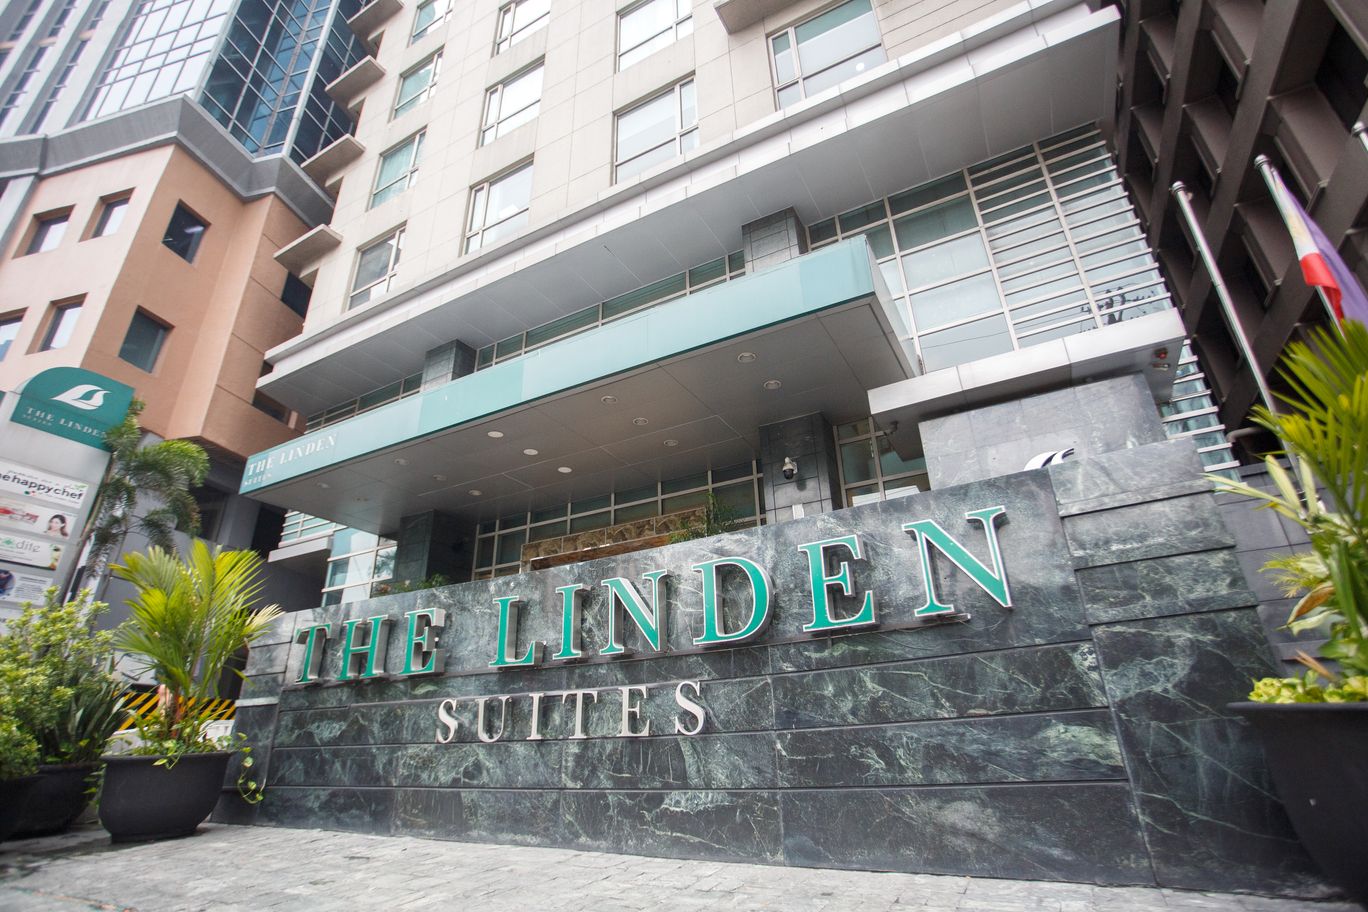 ❤️ Create cherished #LindenMoments... - The Linden Suites | Facebook